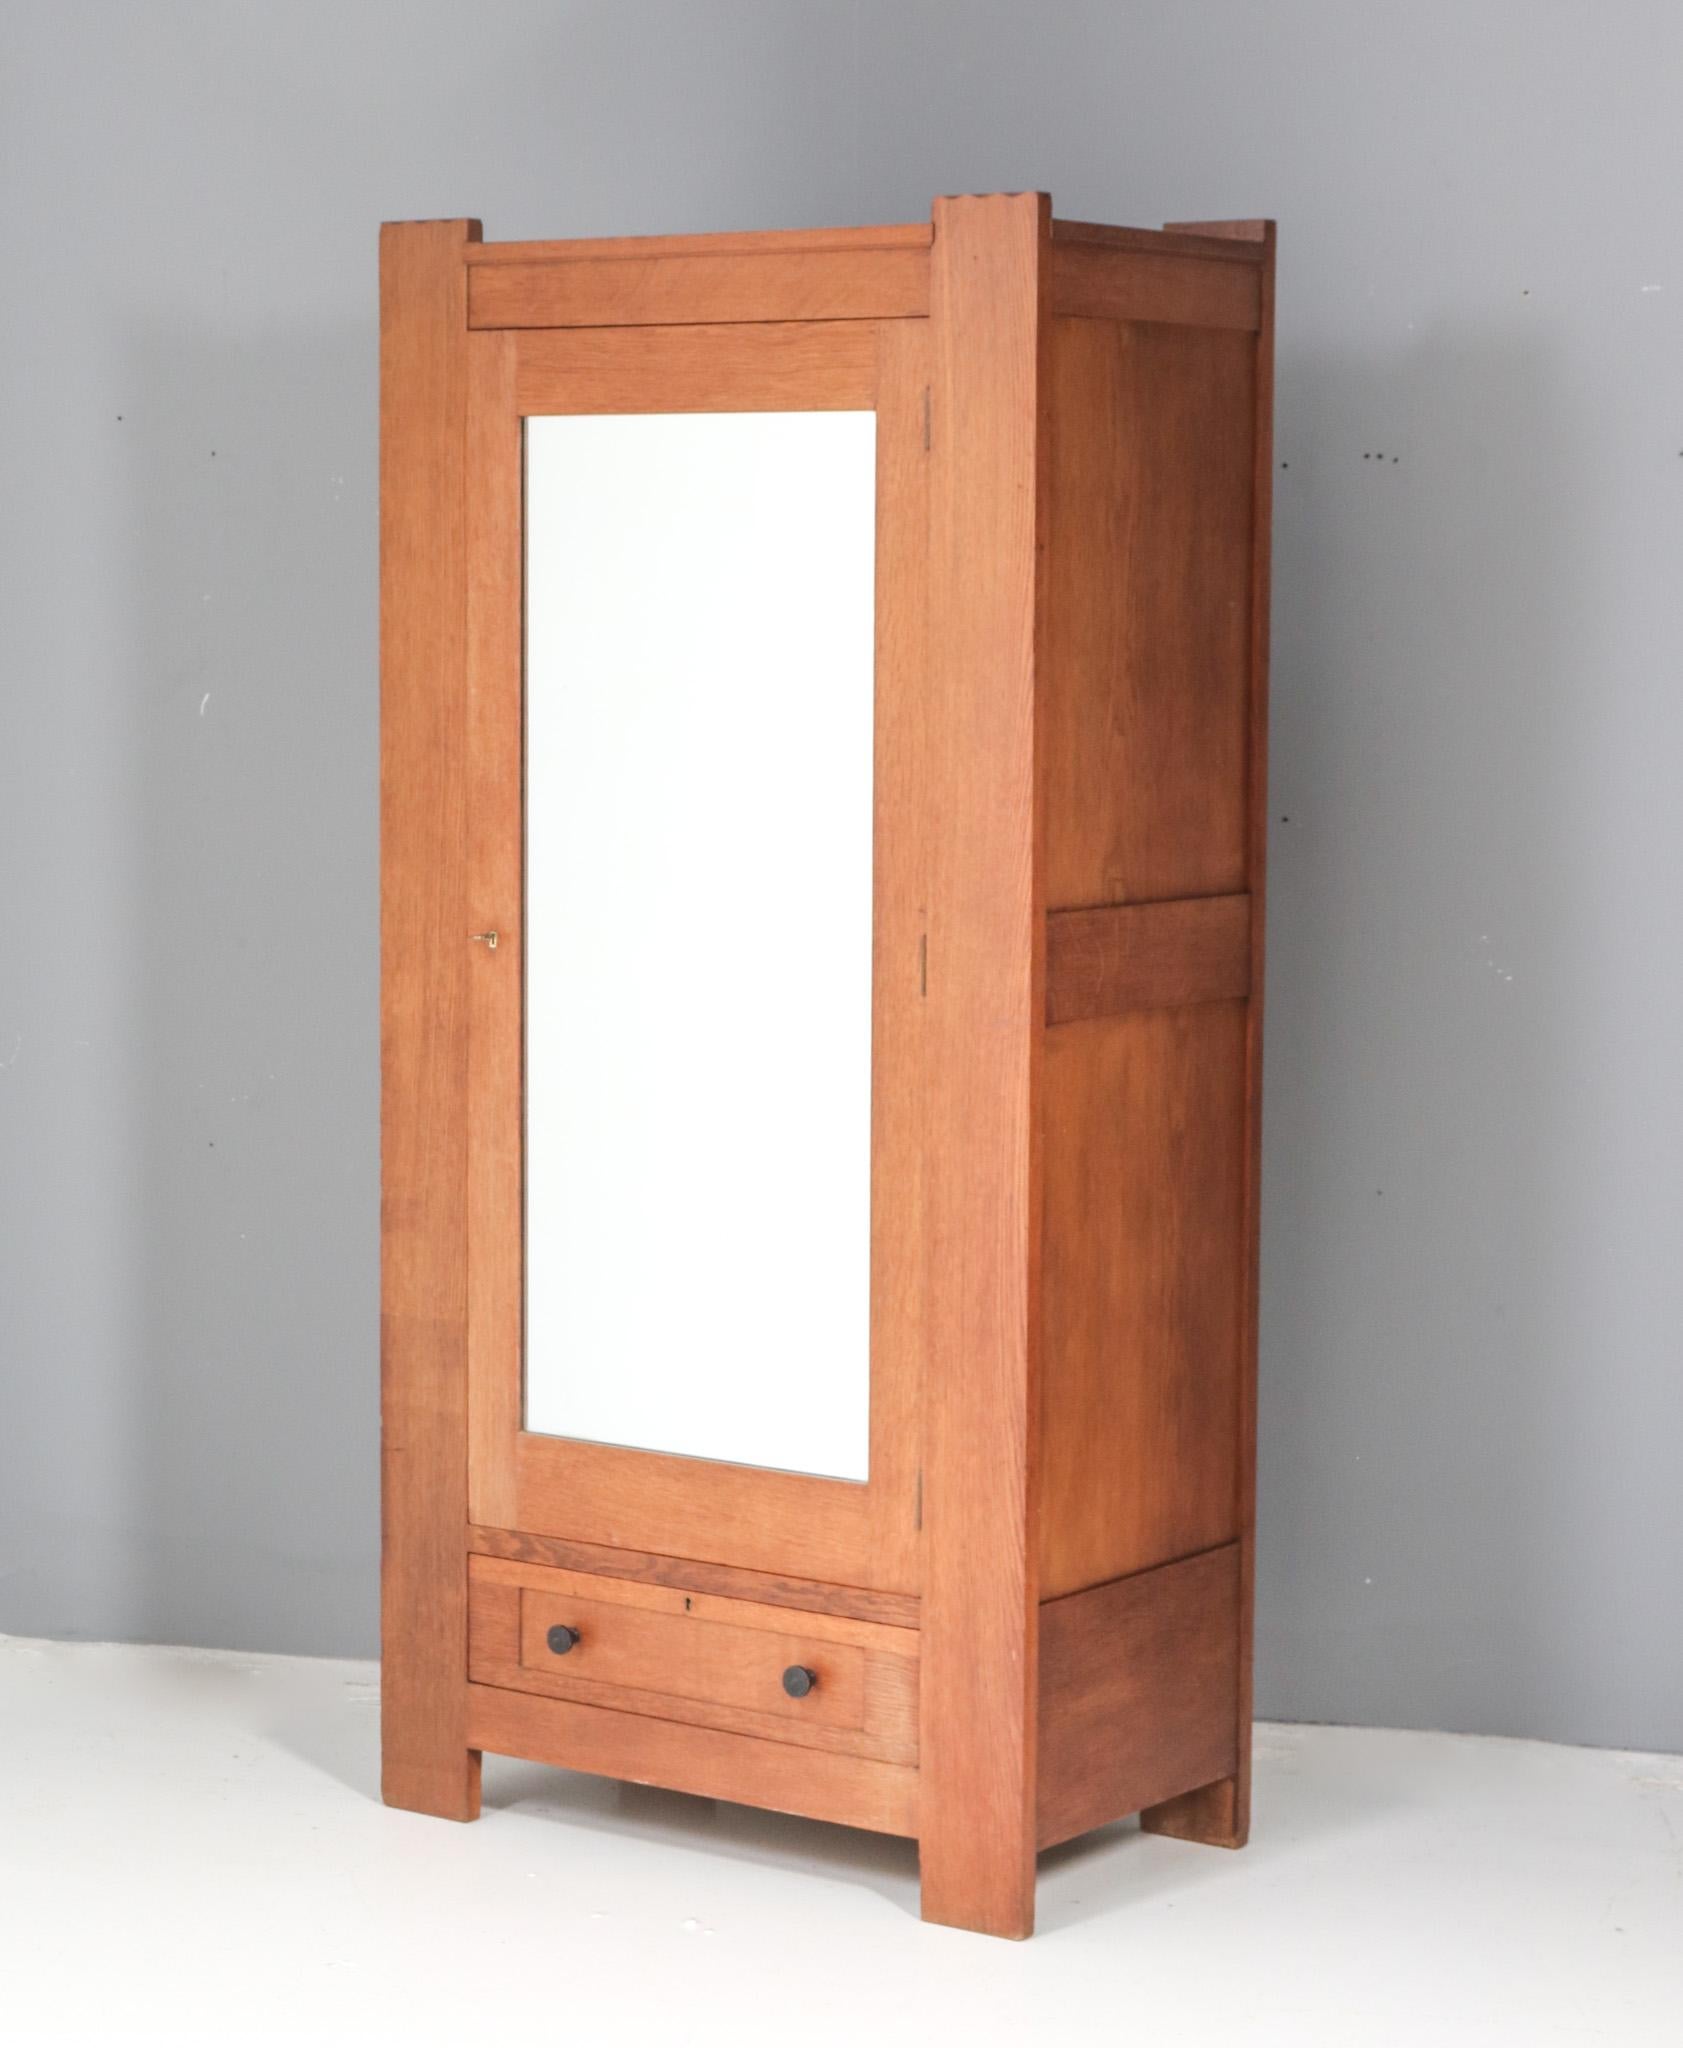 Magnificent and ultra rare Art Deco Modernist armoire or wardrobe.
Design by Hendrik Wouda for H. Pander & Zonen Den Haag.
Striking Dutch design from the 1920s.
Solid oak base with original black lacquered knobs on the drawer.
Behind the door with